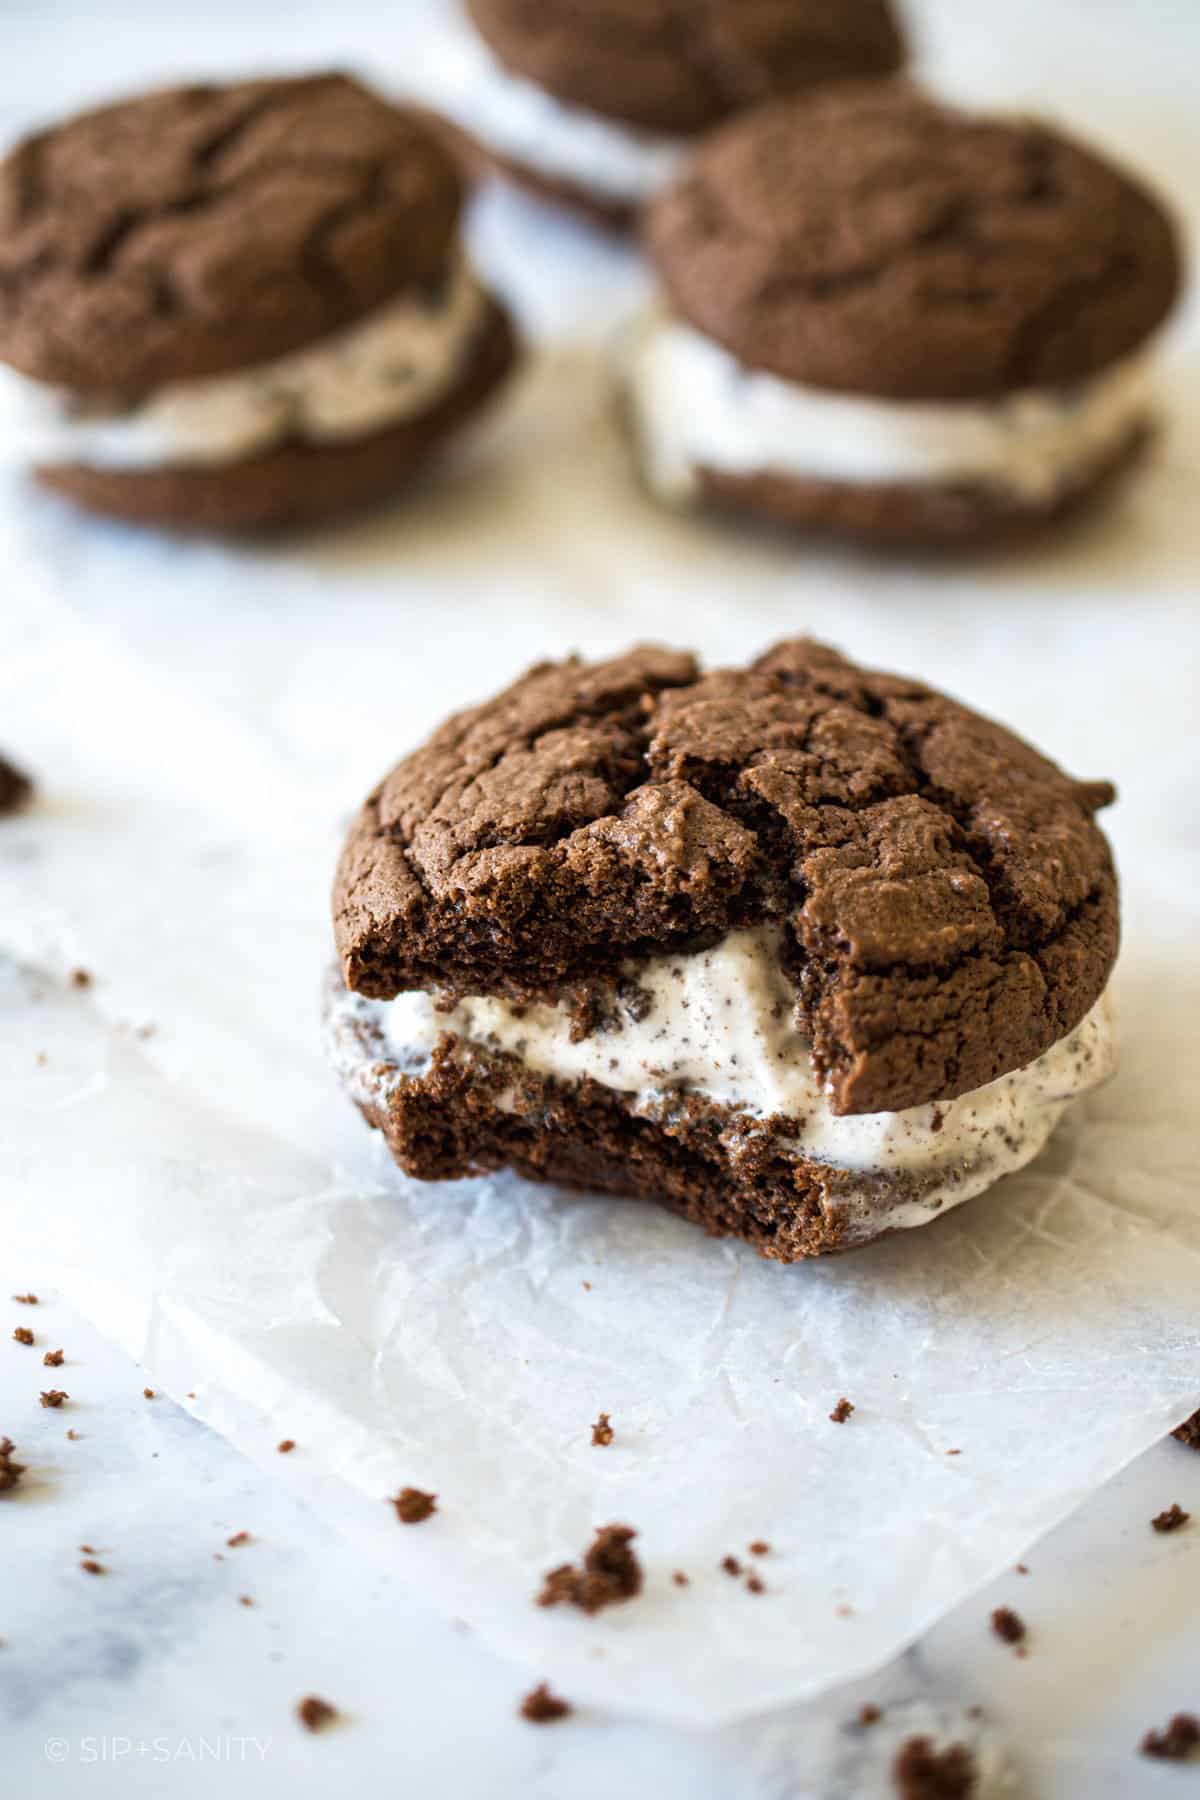 A cookie ice cream sandwich with a bite taken from it.